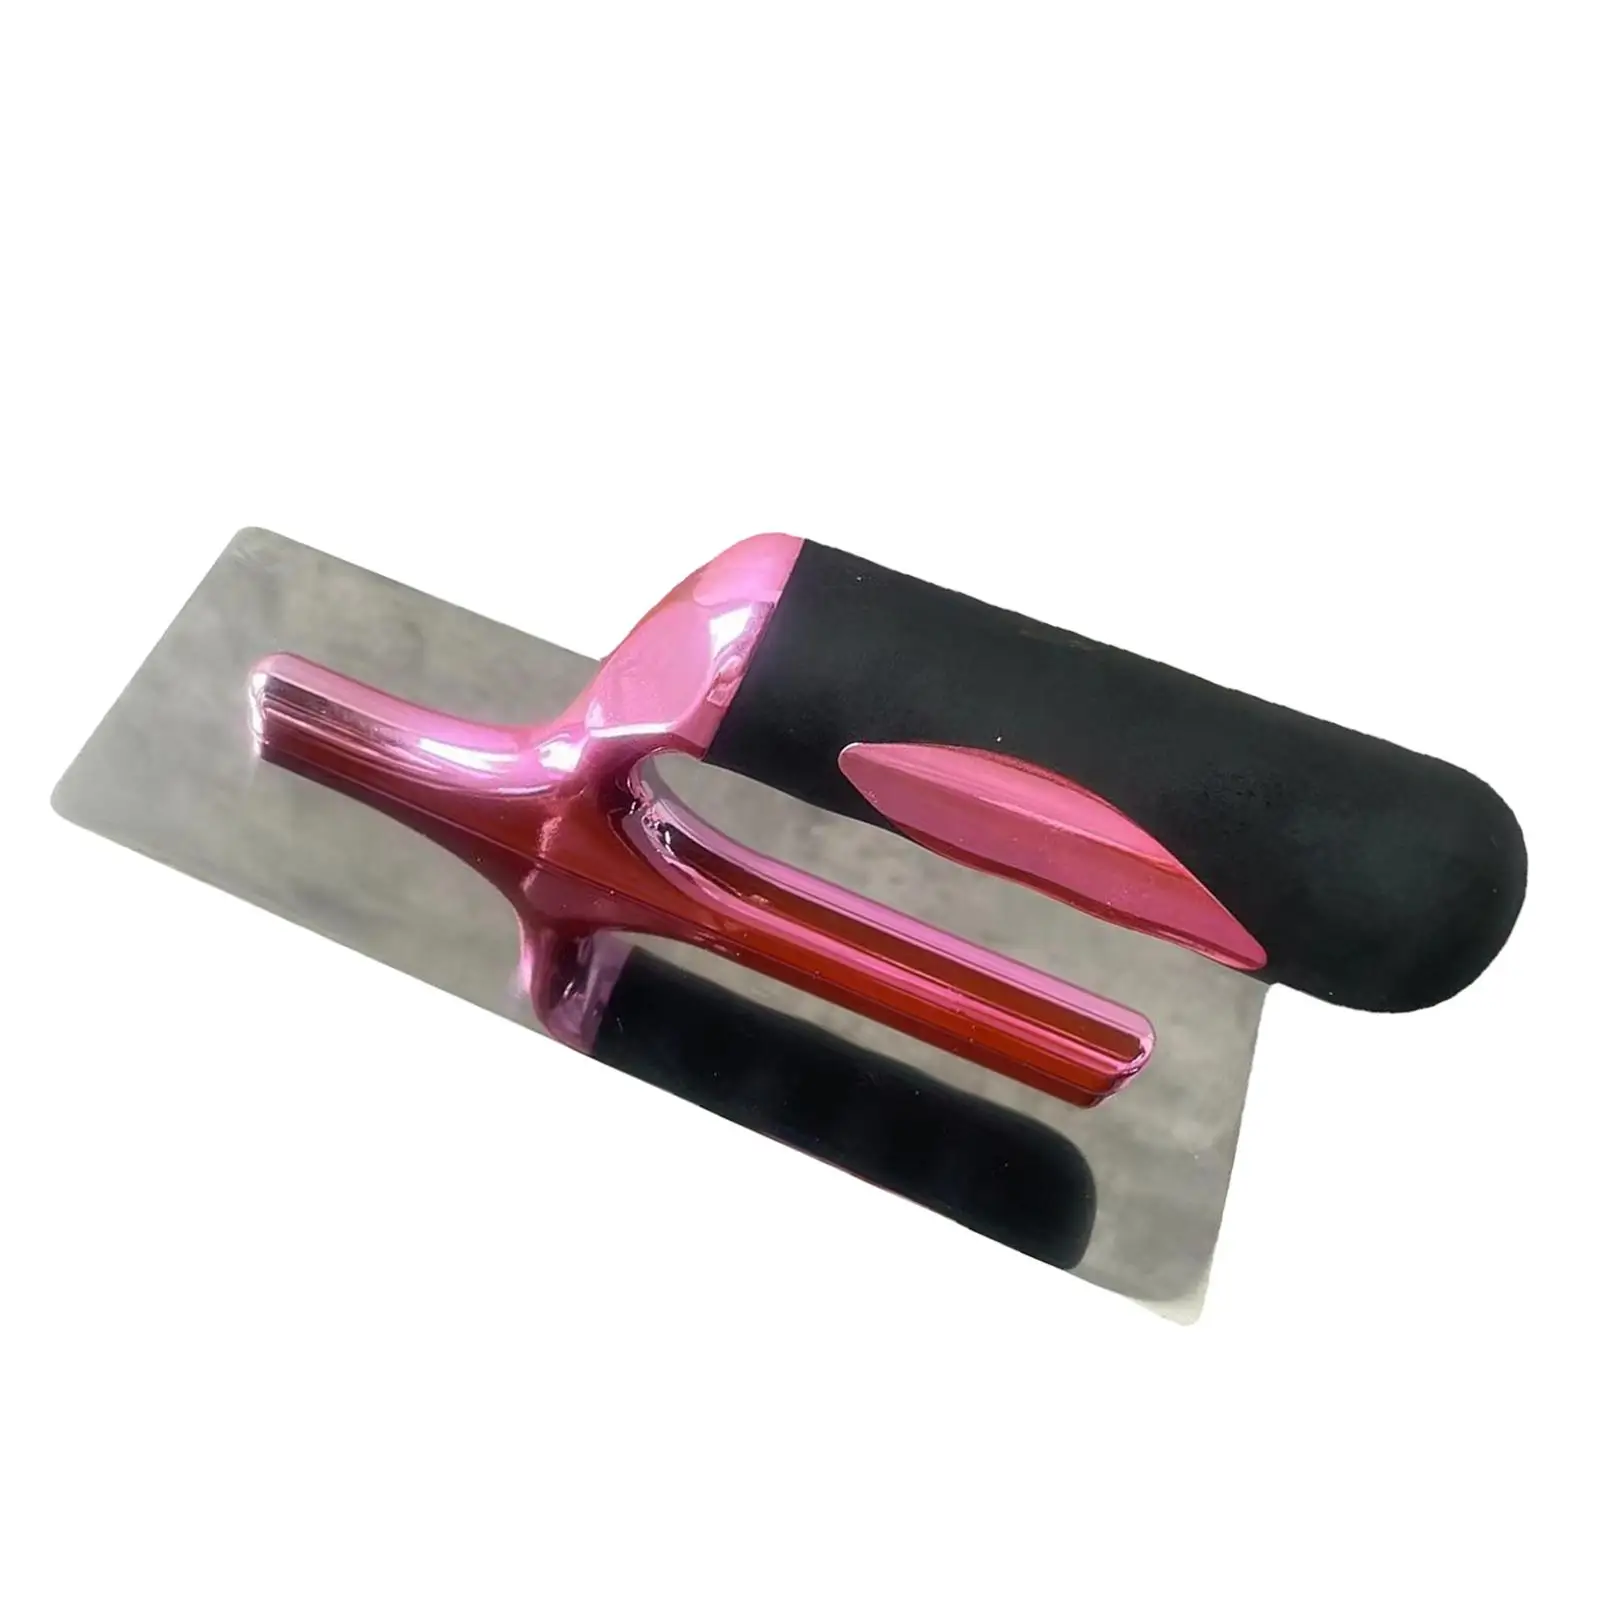 Finishing Trowel Construction Tool Steel Filling Spatula Multifunctional Comfort Grip Flat Drywall Trowel for Home Decorating